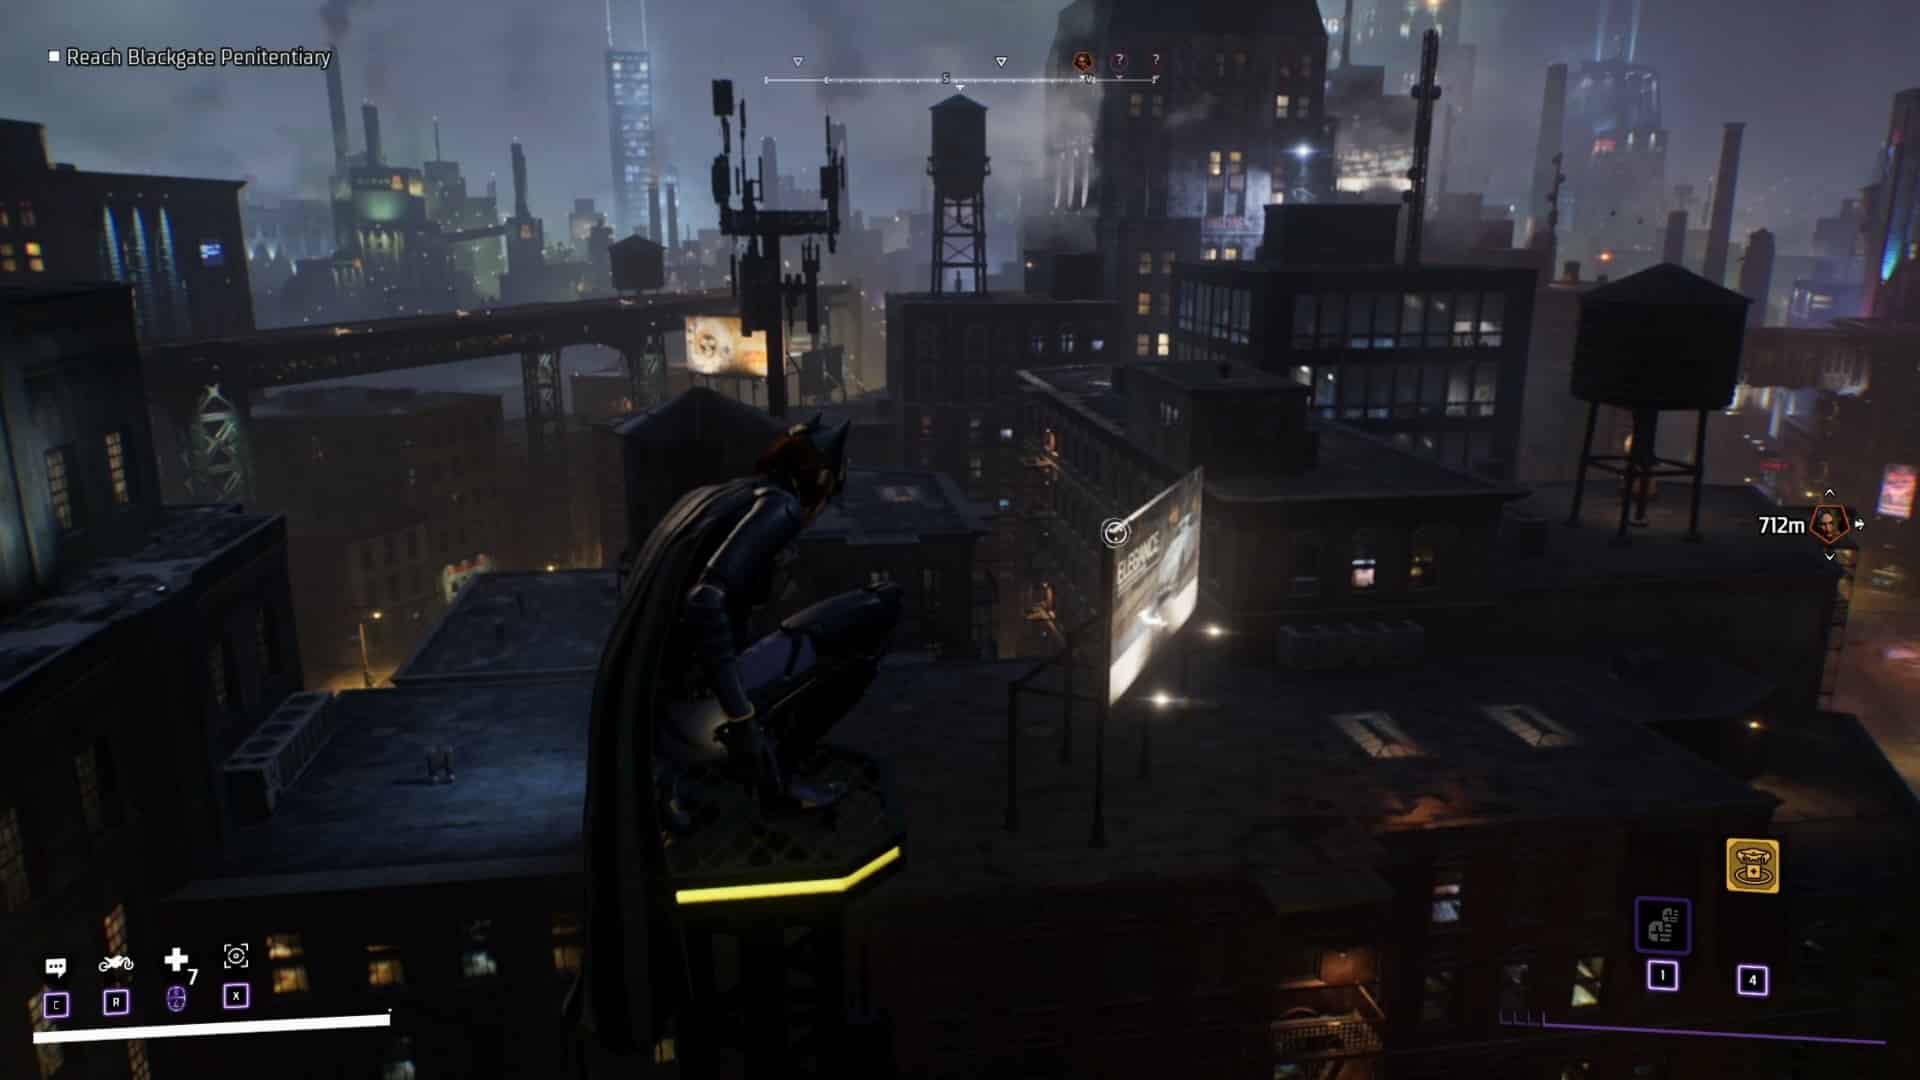 (Gotham City at night is a sight to behold and strong reminiscent of the film and series version of the city)